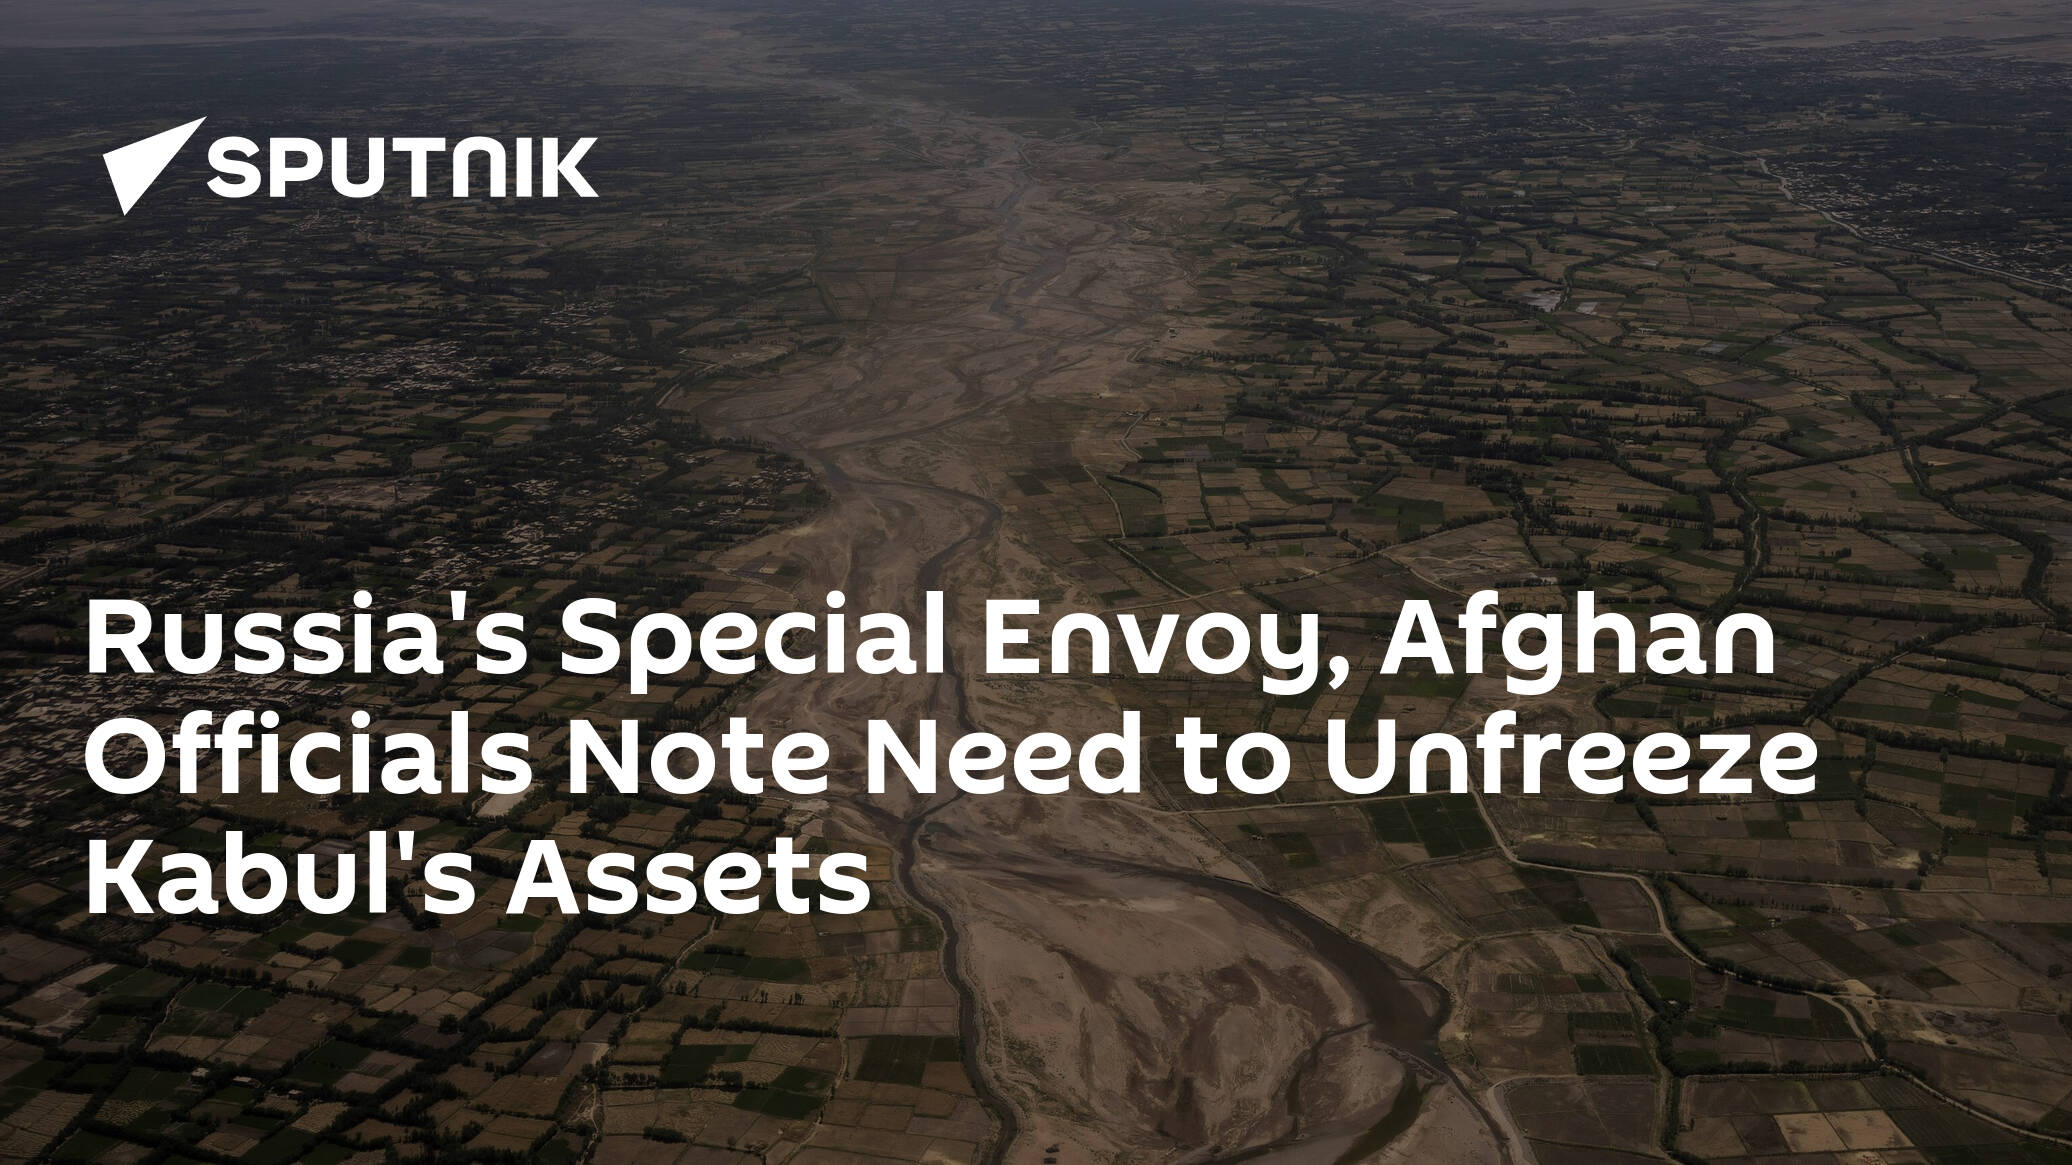 Russia's Special Envoy, Afghan Officials Note Need to Unfreeze Kabul's Assets